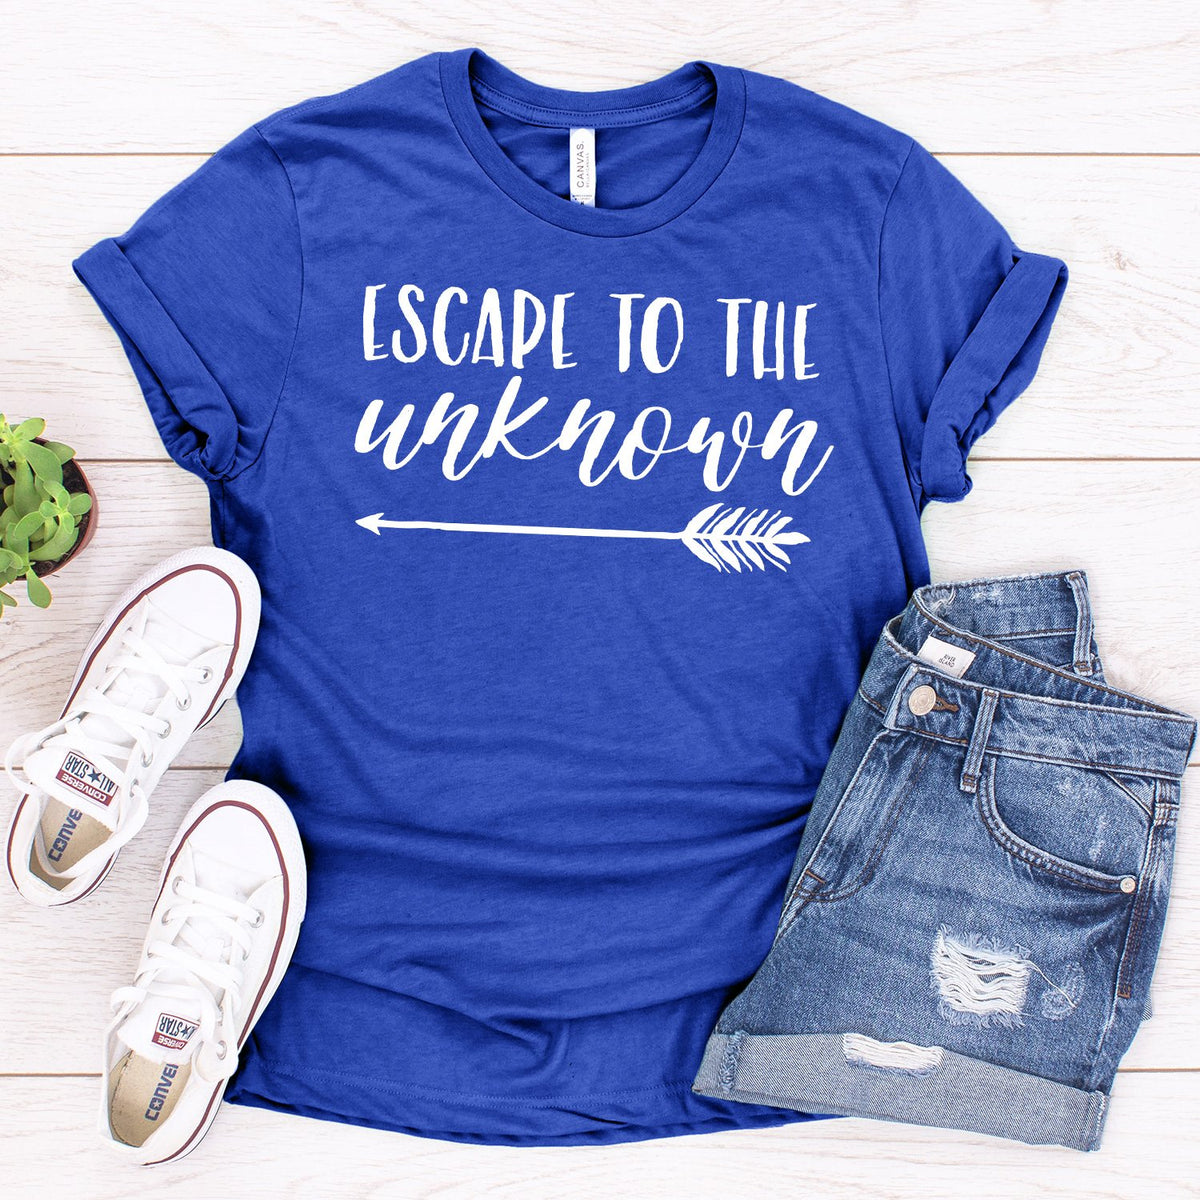 Escape to The Unknown - Short Sleeve Tee Shirt